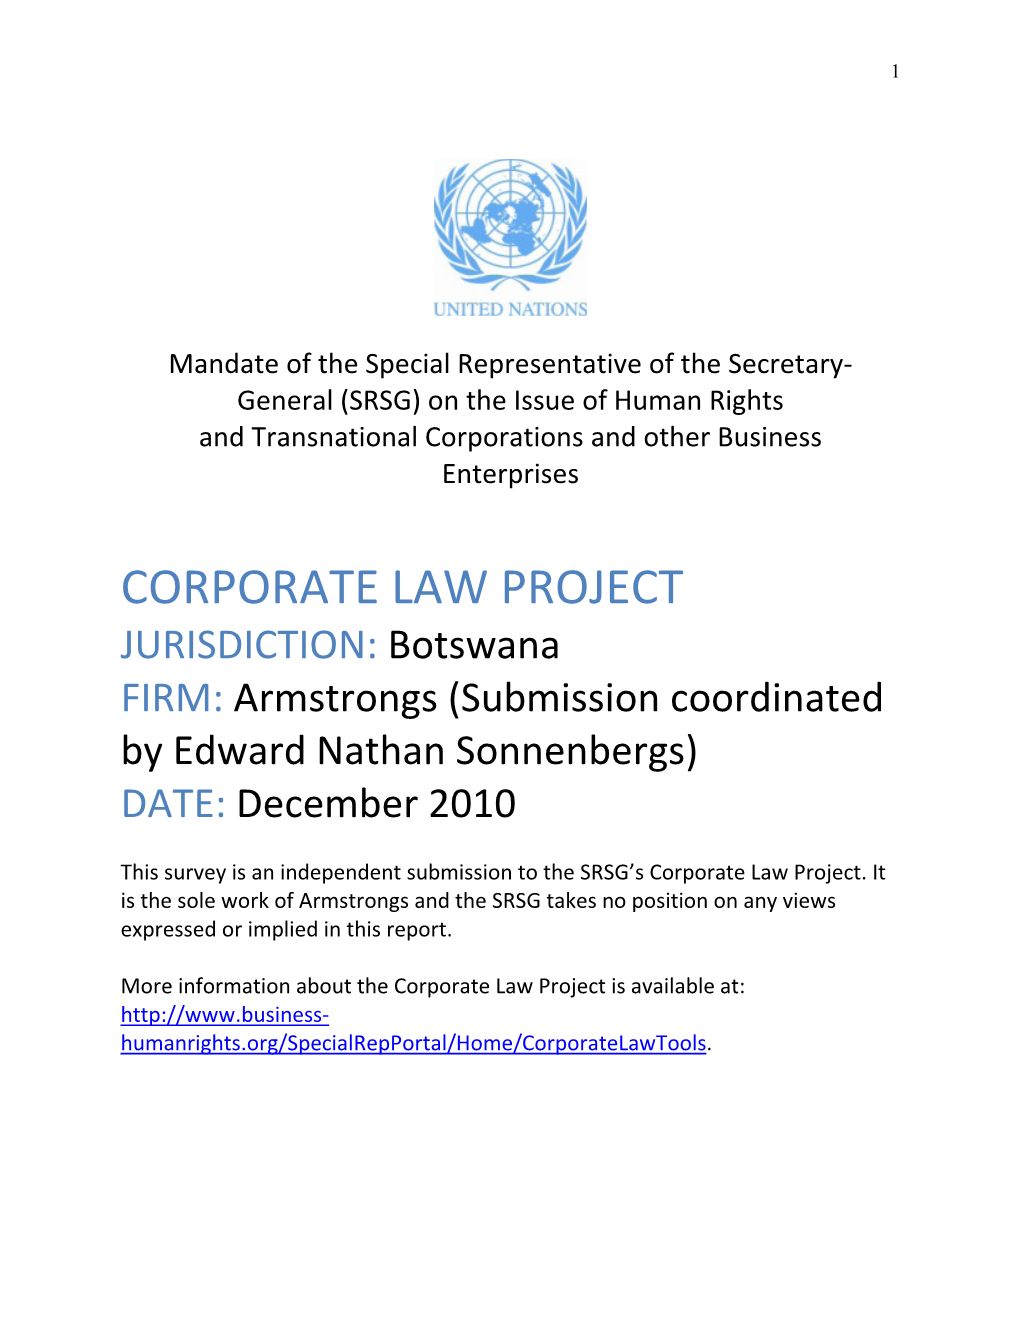 CORPORATE LAW PROJECT JURISDICTION: Botswana FIRM: Armstrongs (Submission Coordinated by Edward Nathan Sonnenbergs) DATE: December 2010